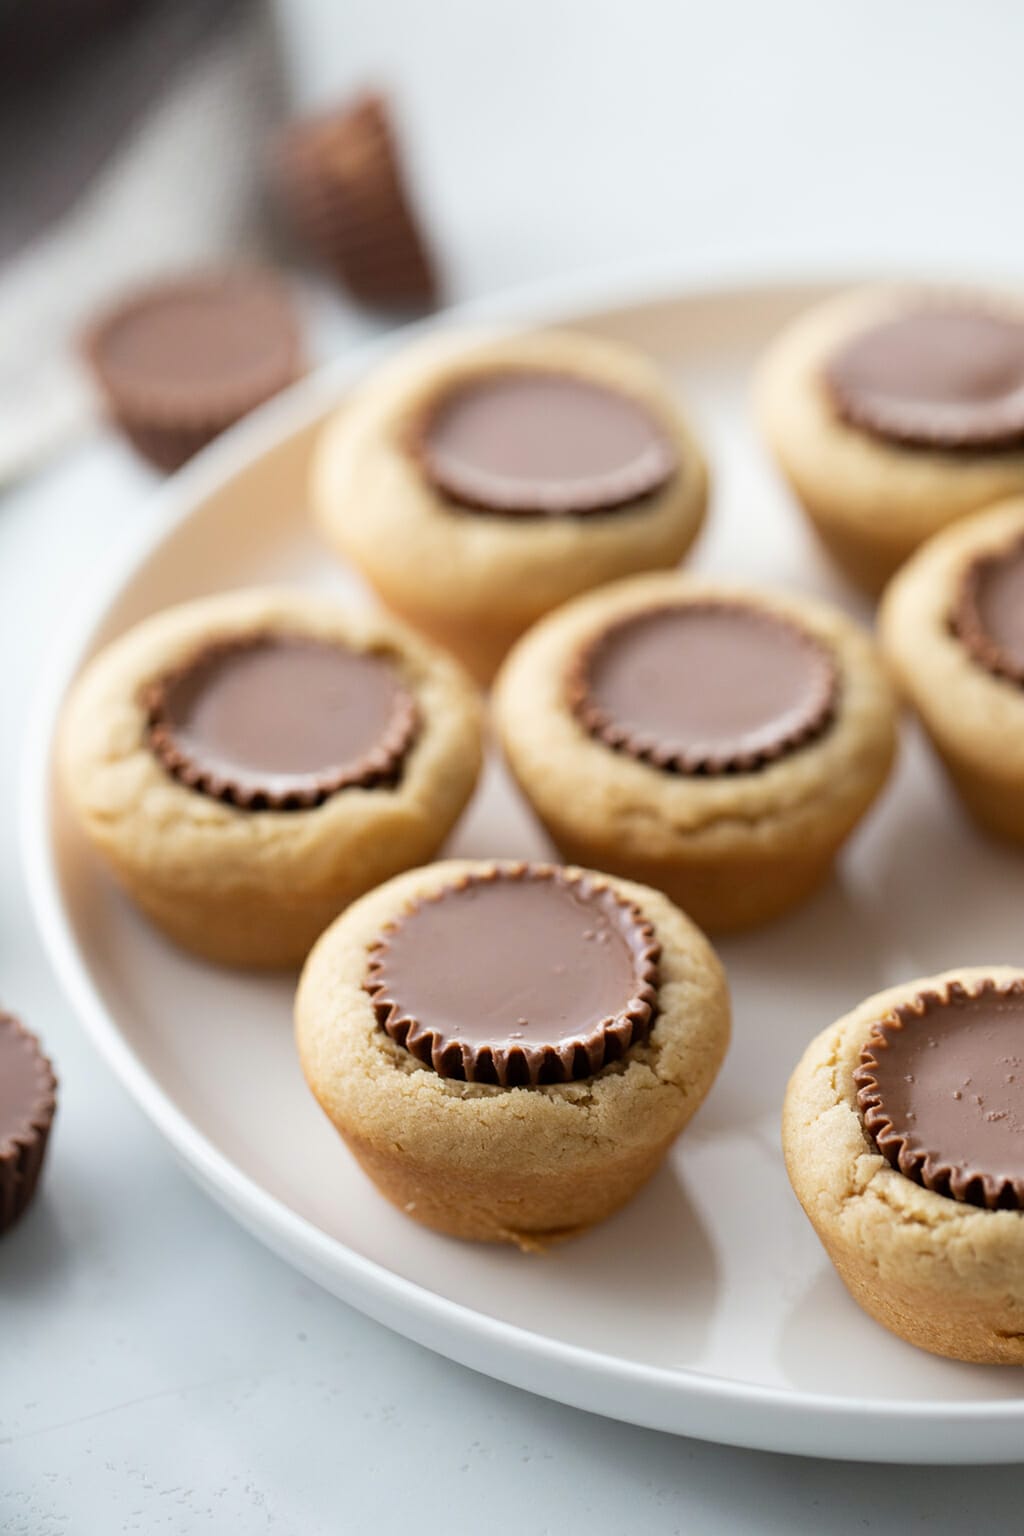 Peanut Butter Cup Cookies with a Reese's Peanut Butter Cup placed in the center of the cookie.